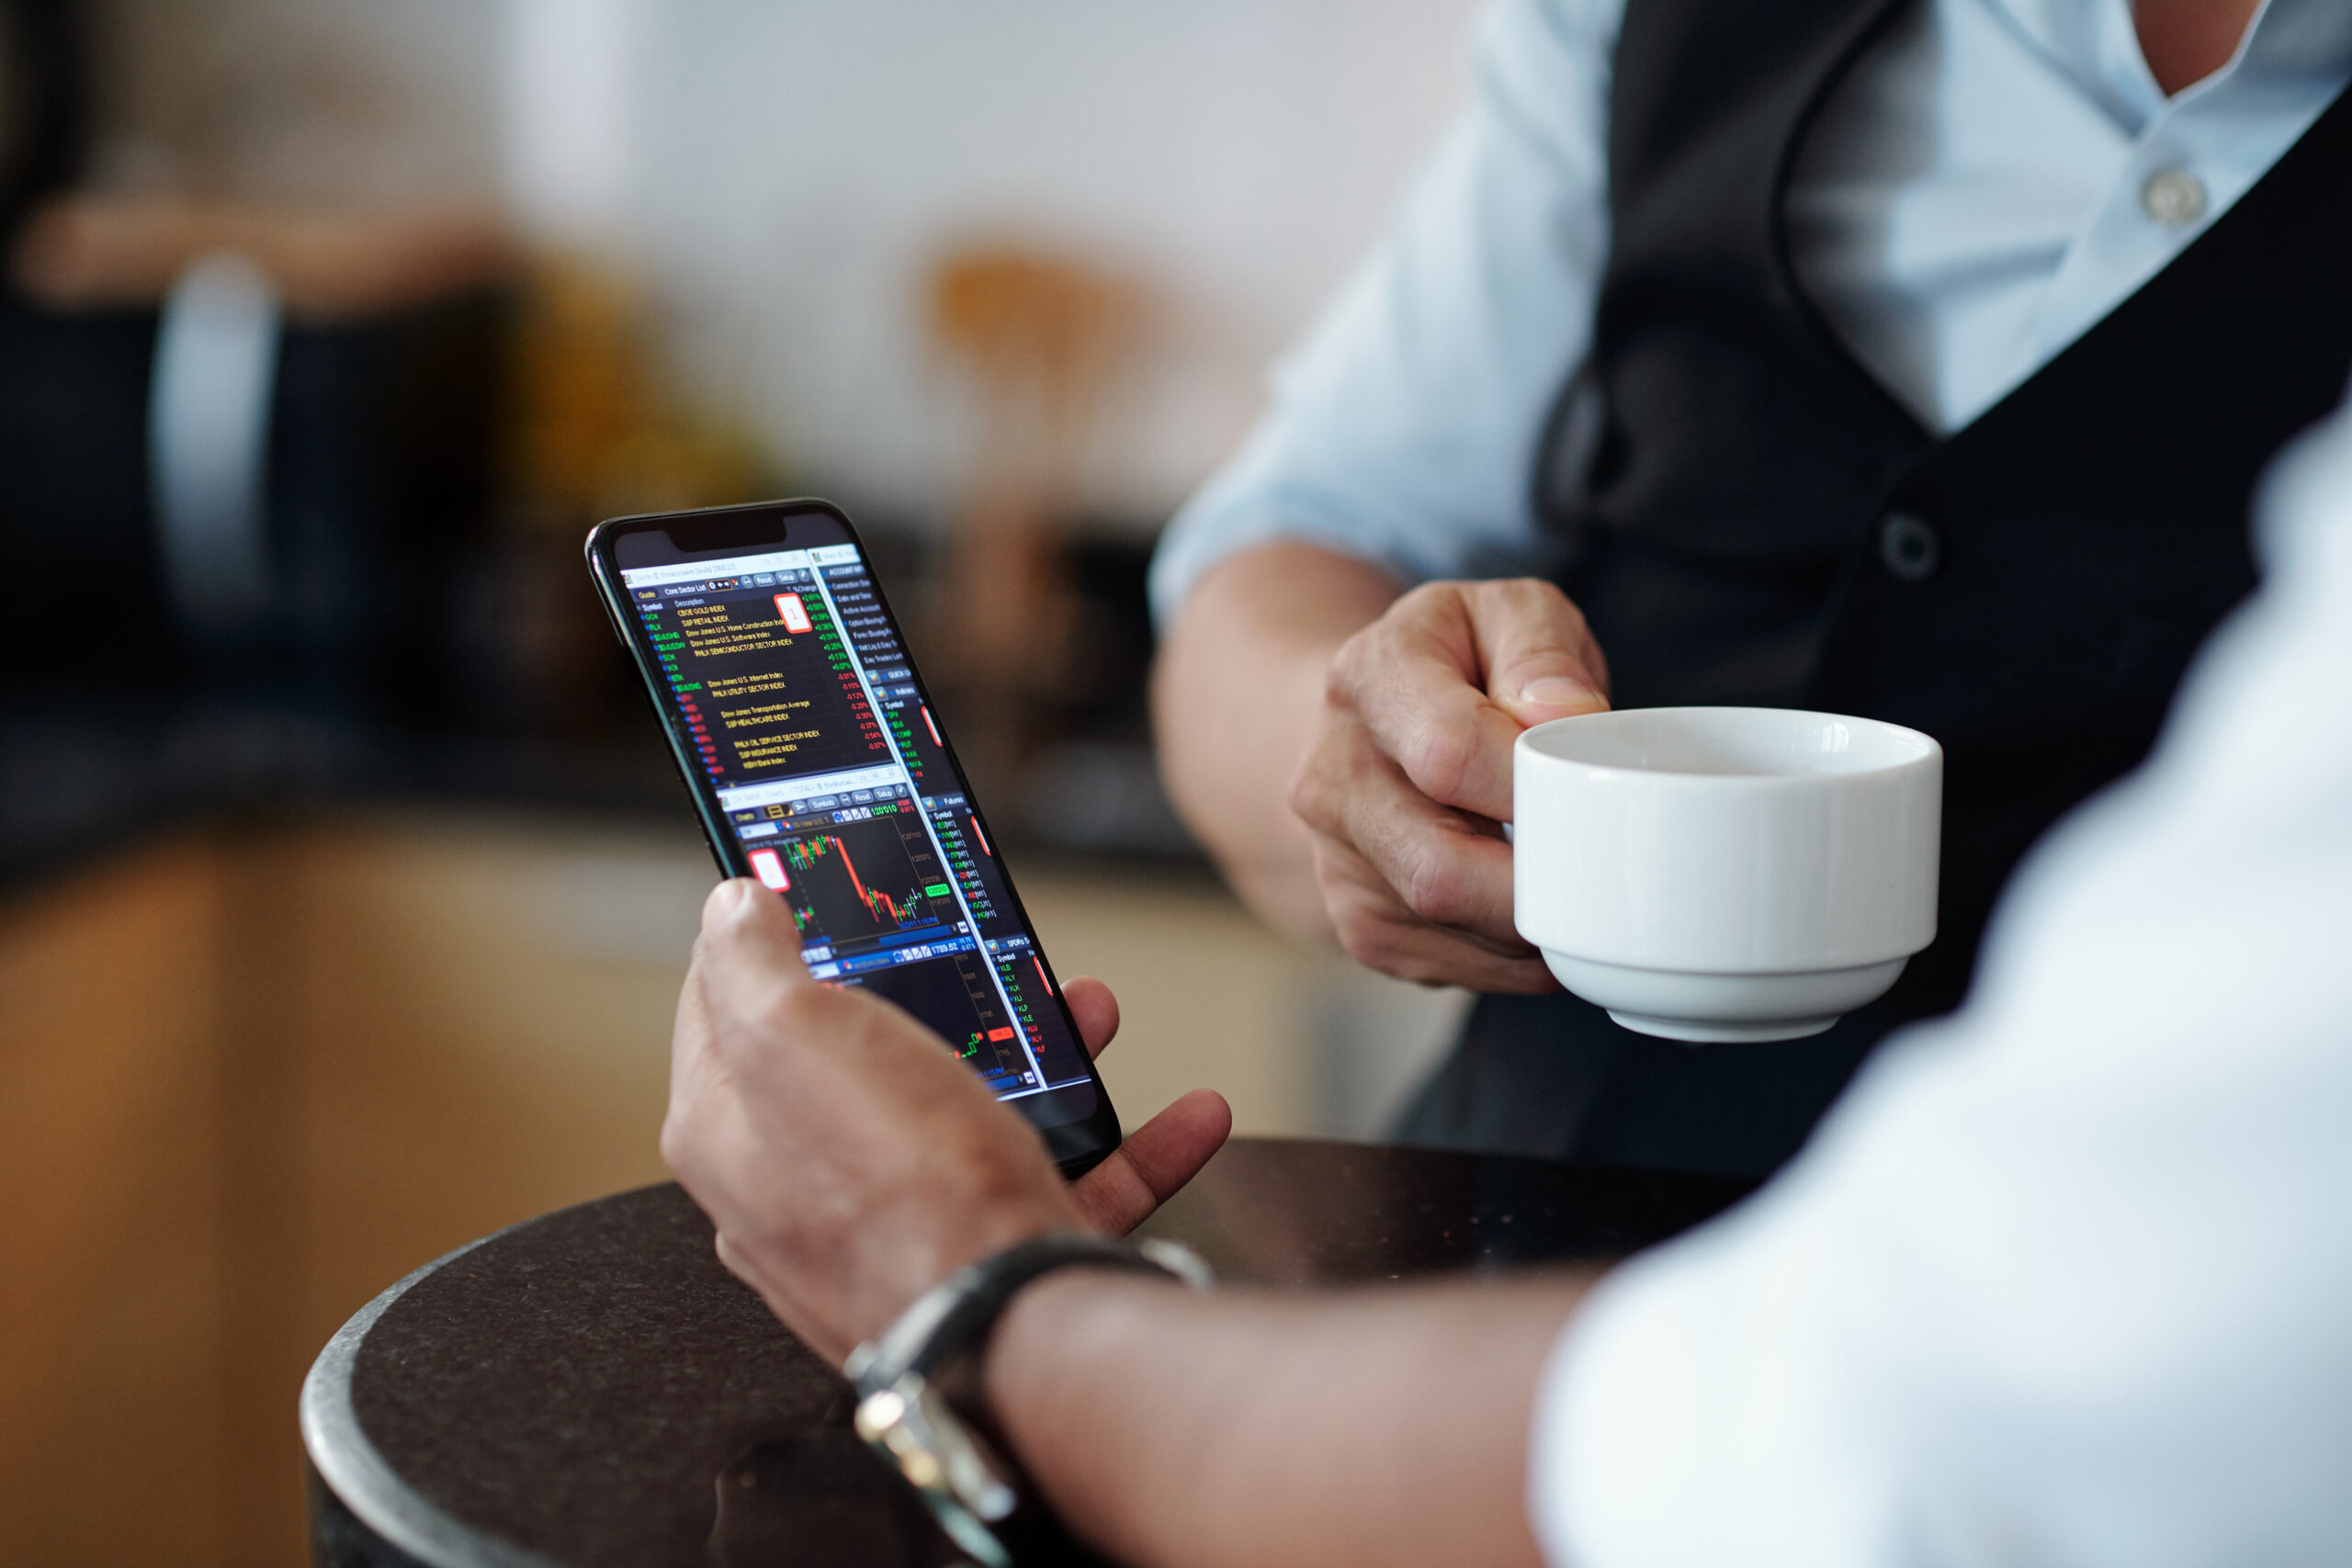 A business professional holding a phone with the screen displaying trading strategies, showcasing his focus on financial decisions, while another professional holds a cup of coffee, symbolizing a blend of productivity and relaxation in the business world.